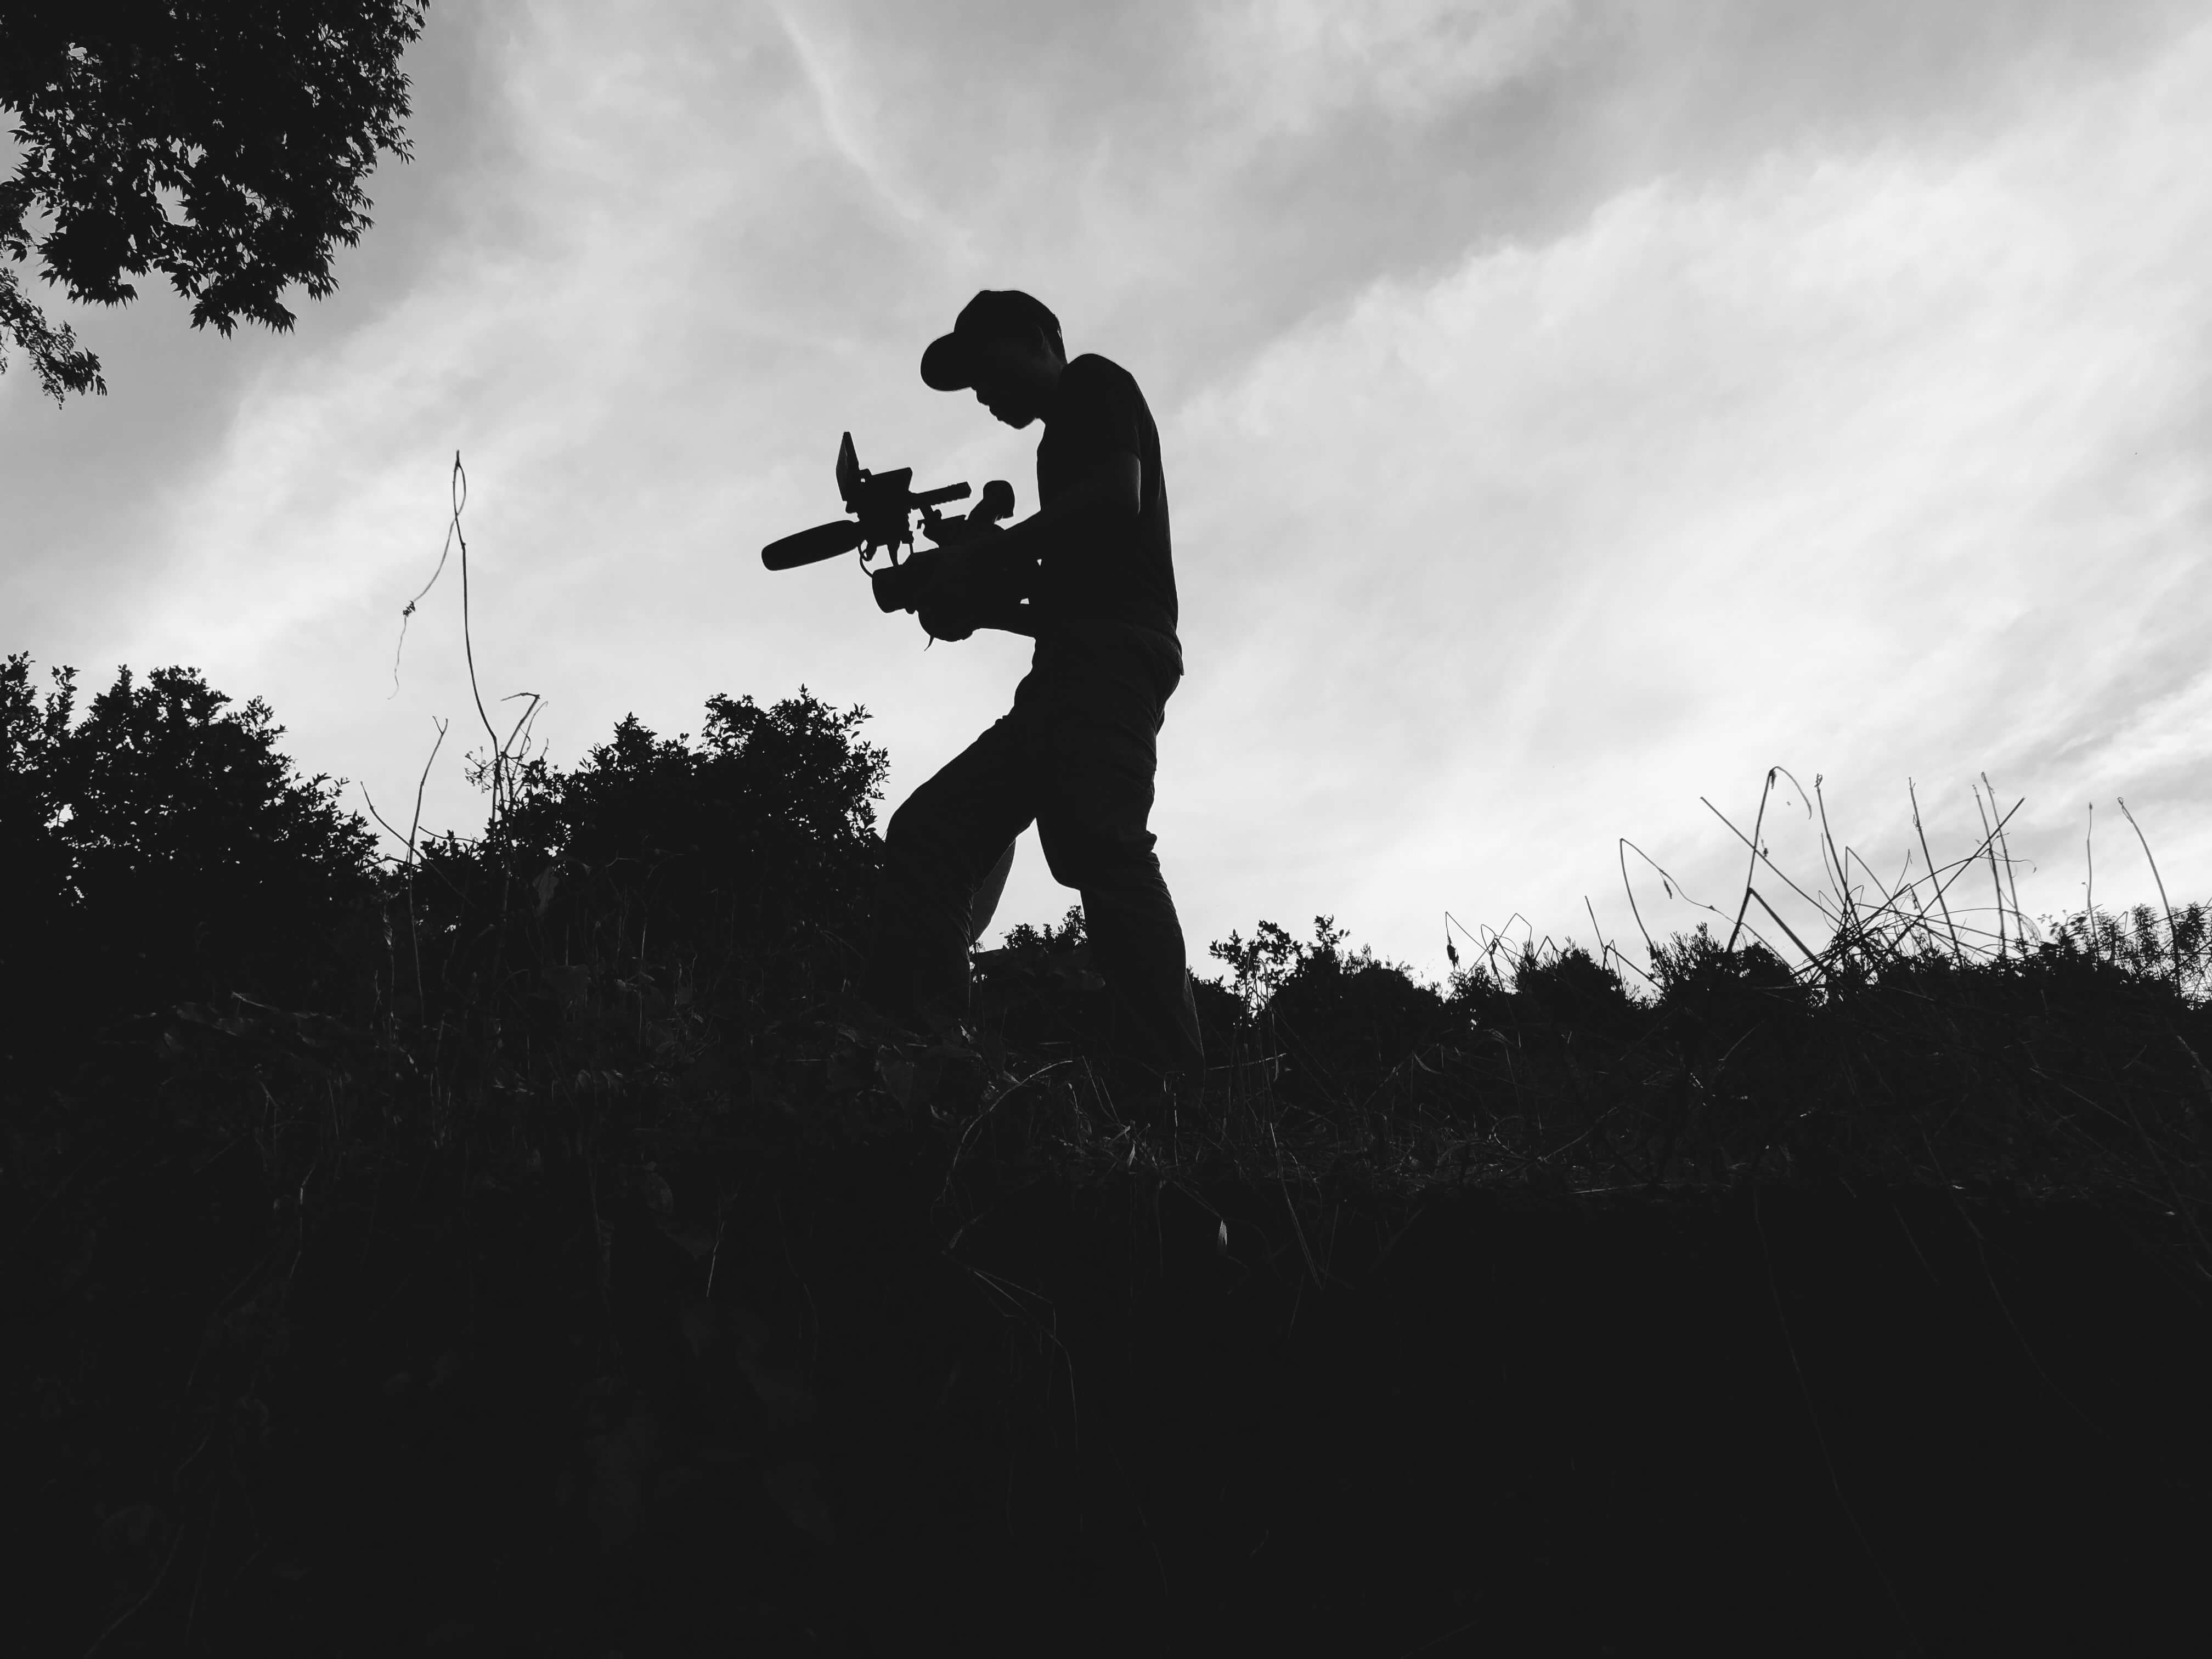 Production still from Silent Beauty. Low-angle shot of a cameraperson walking with equipment in hands, surrounded by nature. Black and white overshadowed shot.